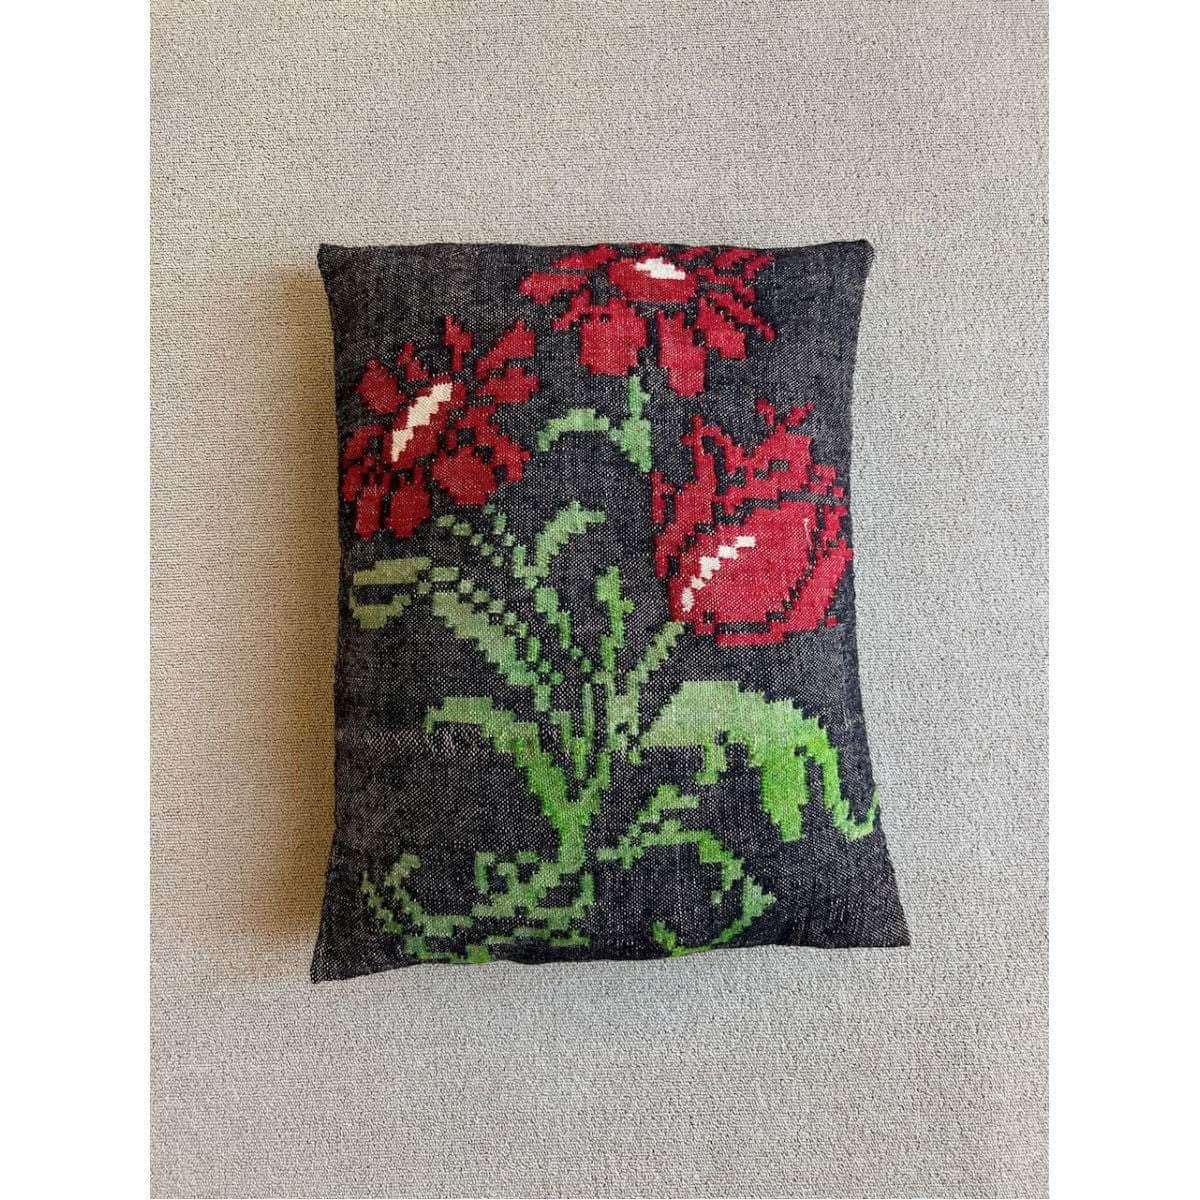 Vintage, Hand-Loomed, Decorative Wool Pillow Cover With Floral Design